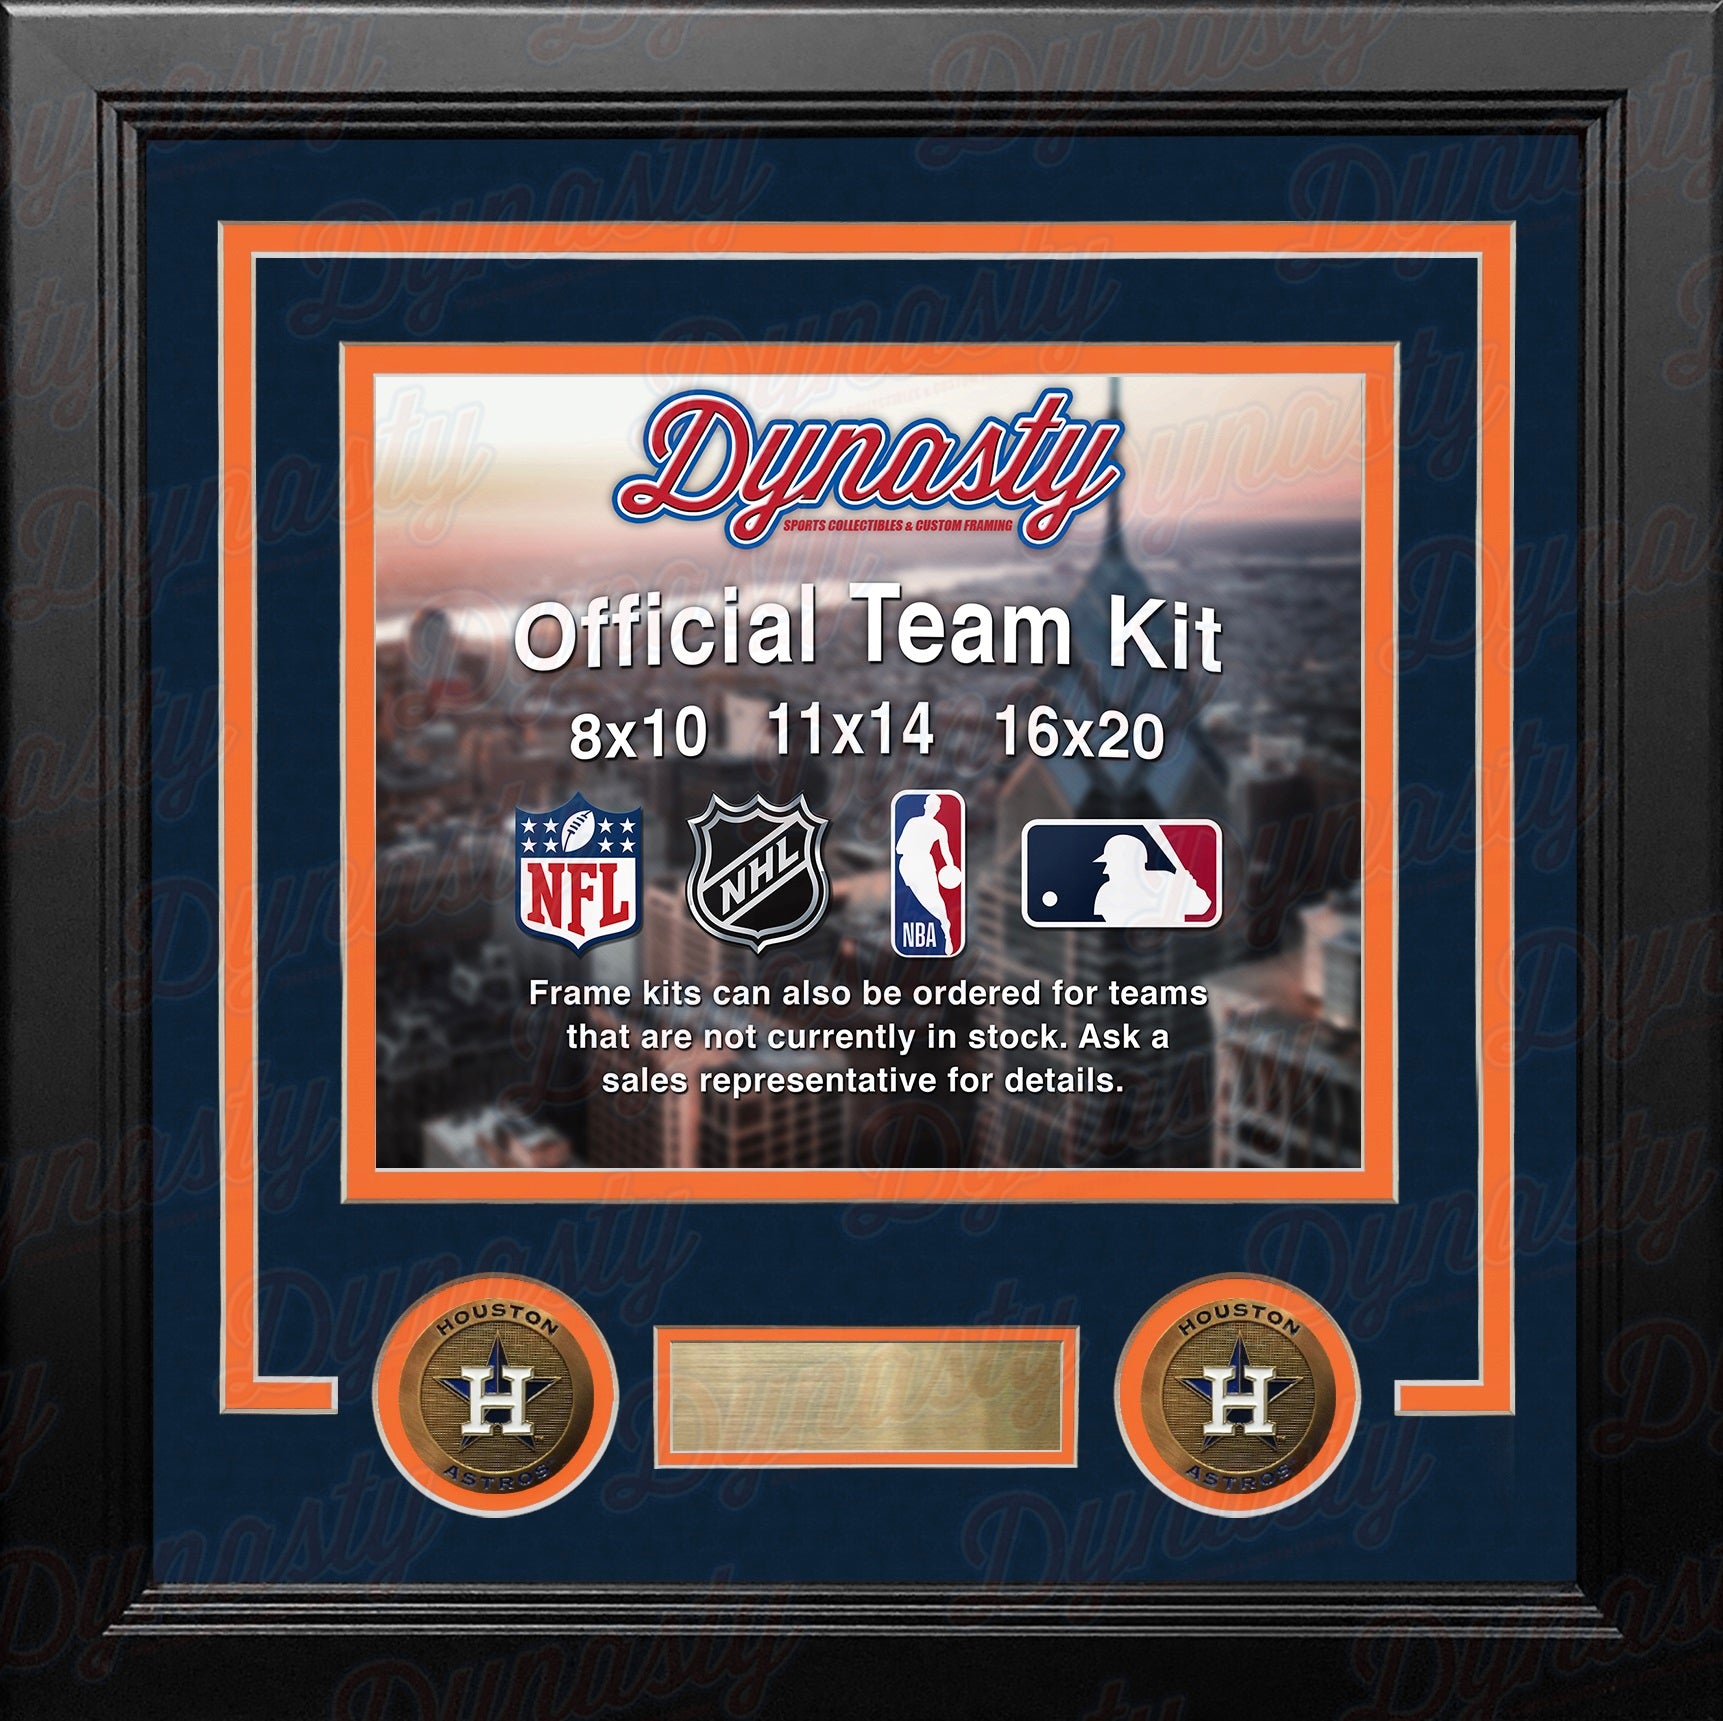 Baseball Jersey Framing MLB Frame Your Autographed Signed Jerseys W/ LOGOS